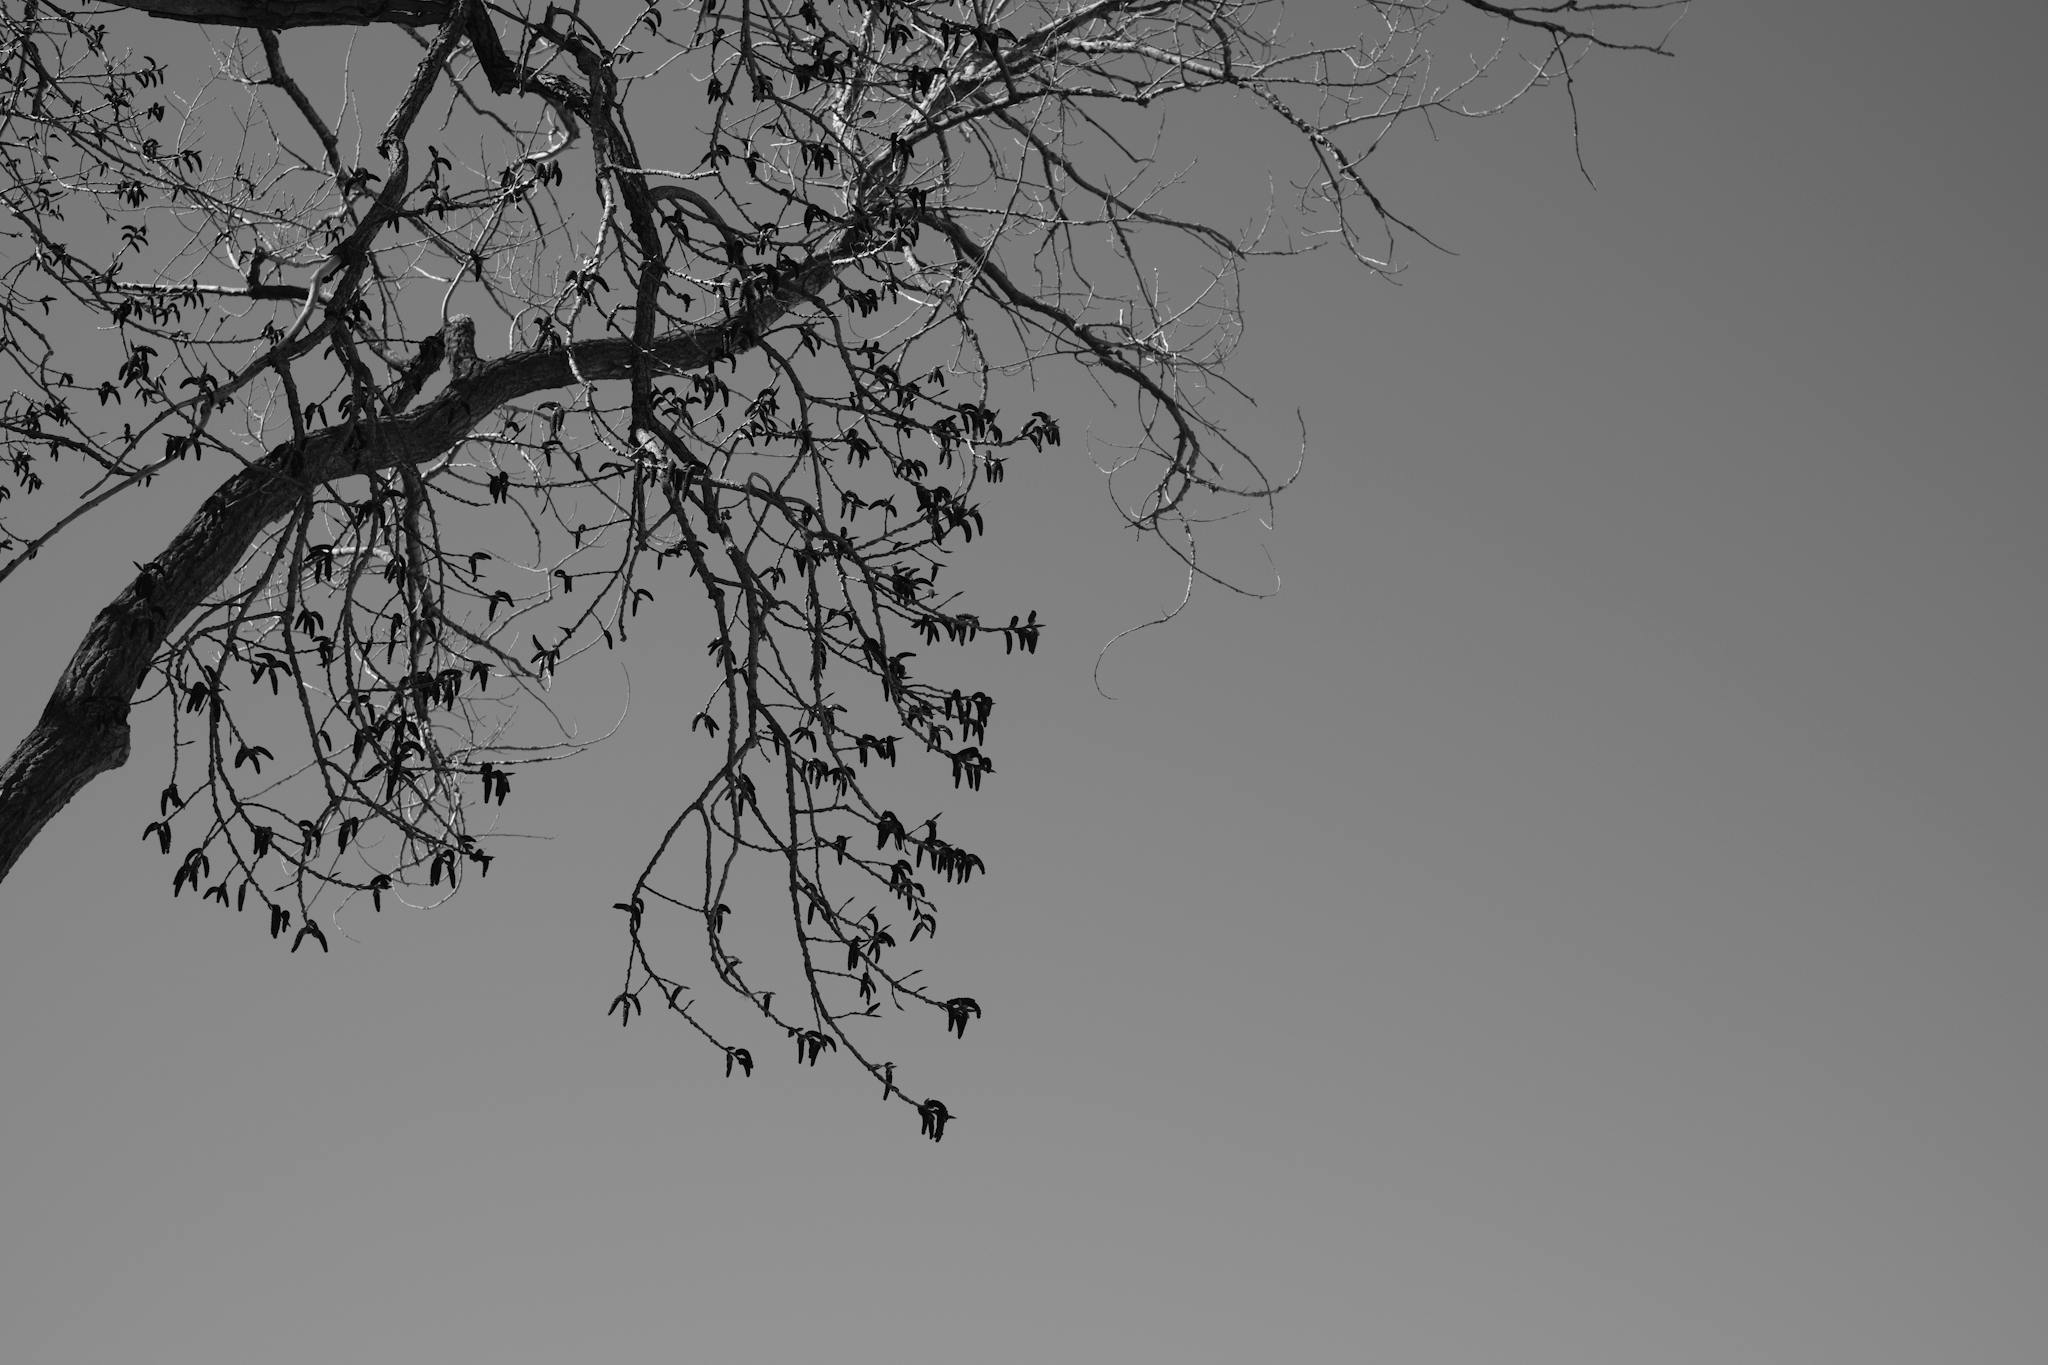 A silhouette of a bare tree branch against a gradient sky, transitioning from light to dark